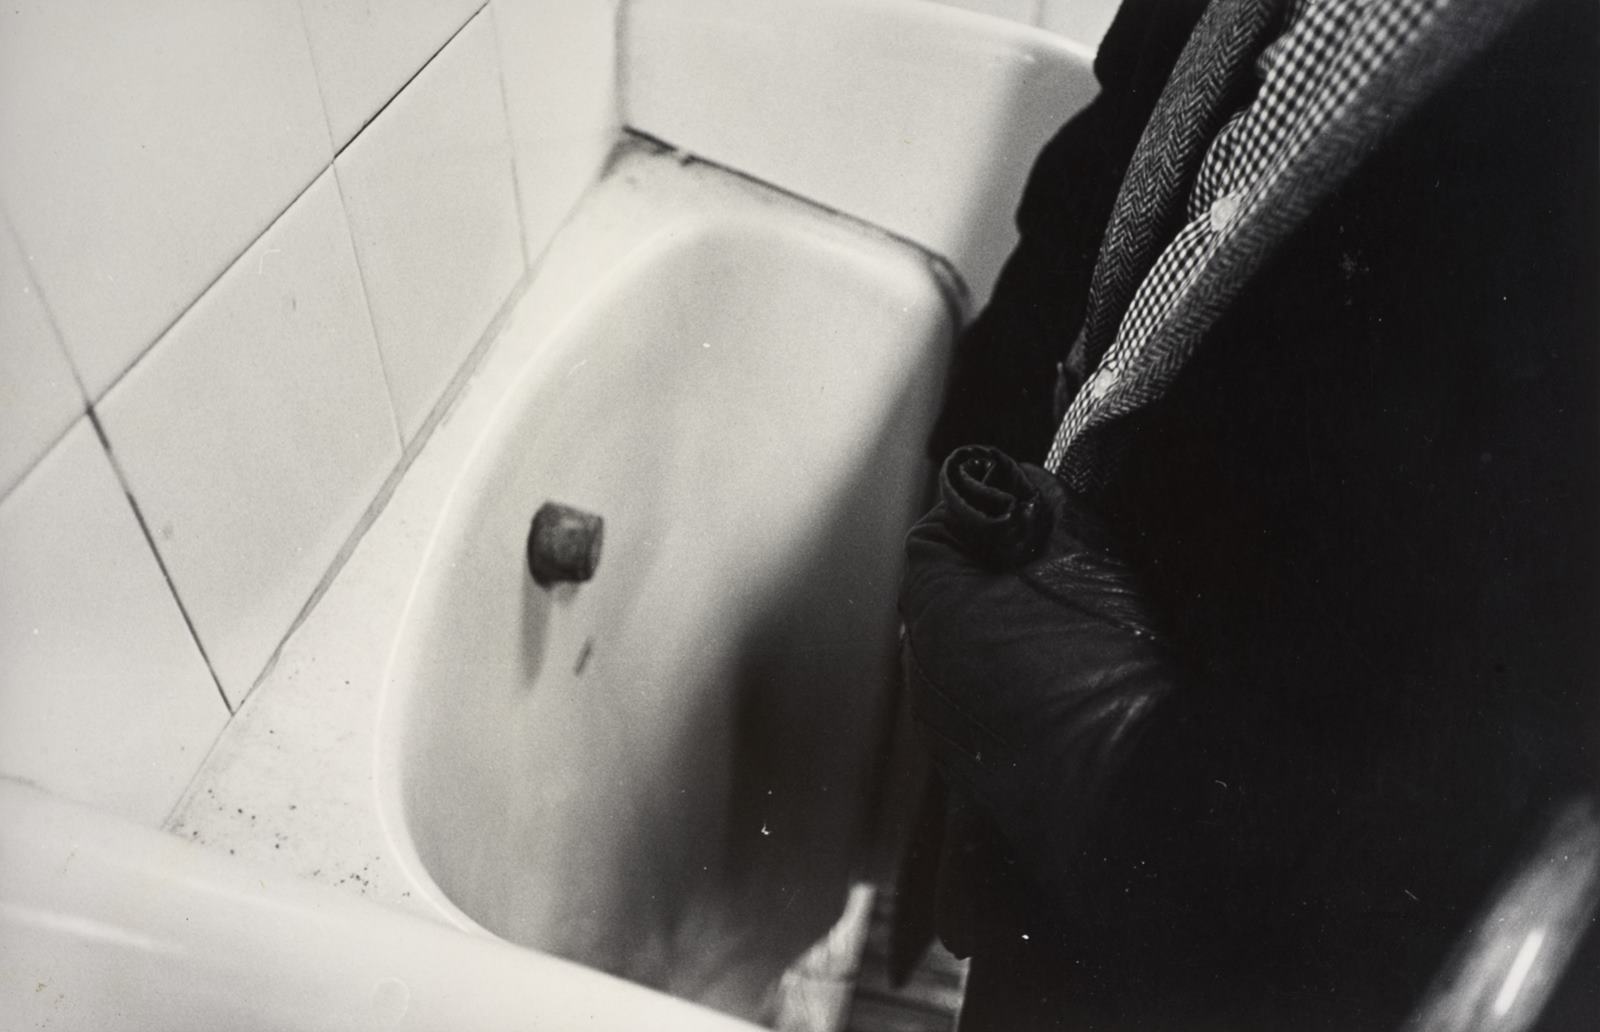 Bog Jobs': public toilets and gay encounters | Museum of London